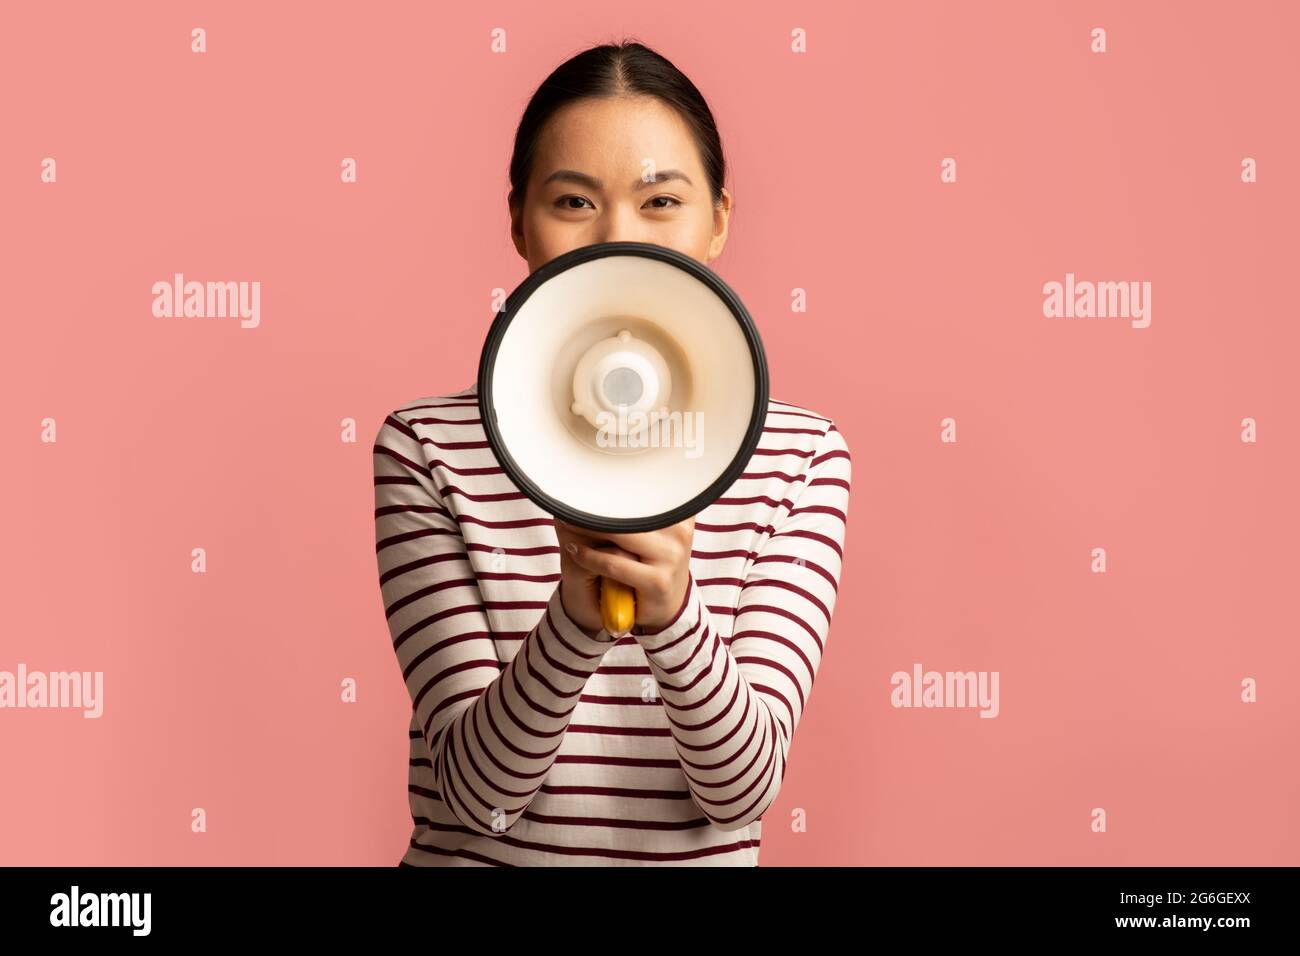 Portrait Of Young Asian Woman With Megaphone In Hands Making Announcement Stock Photo